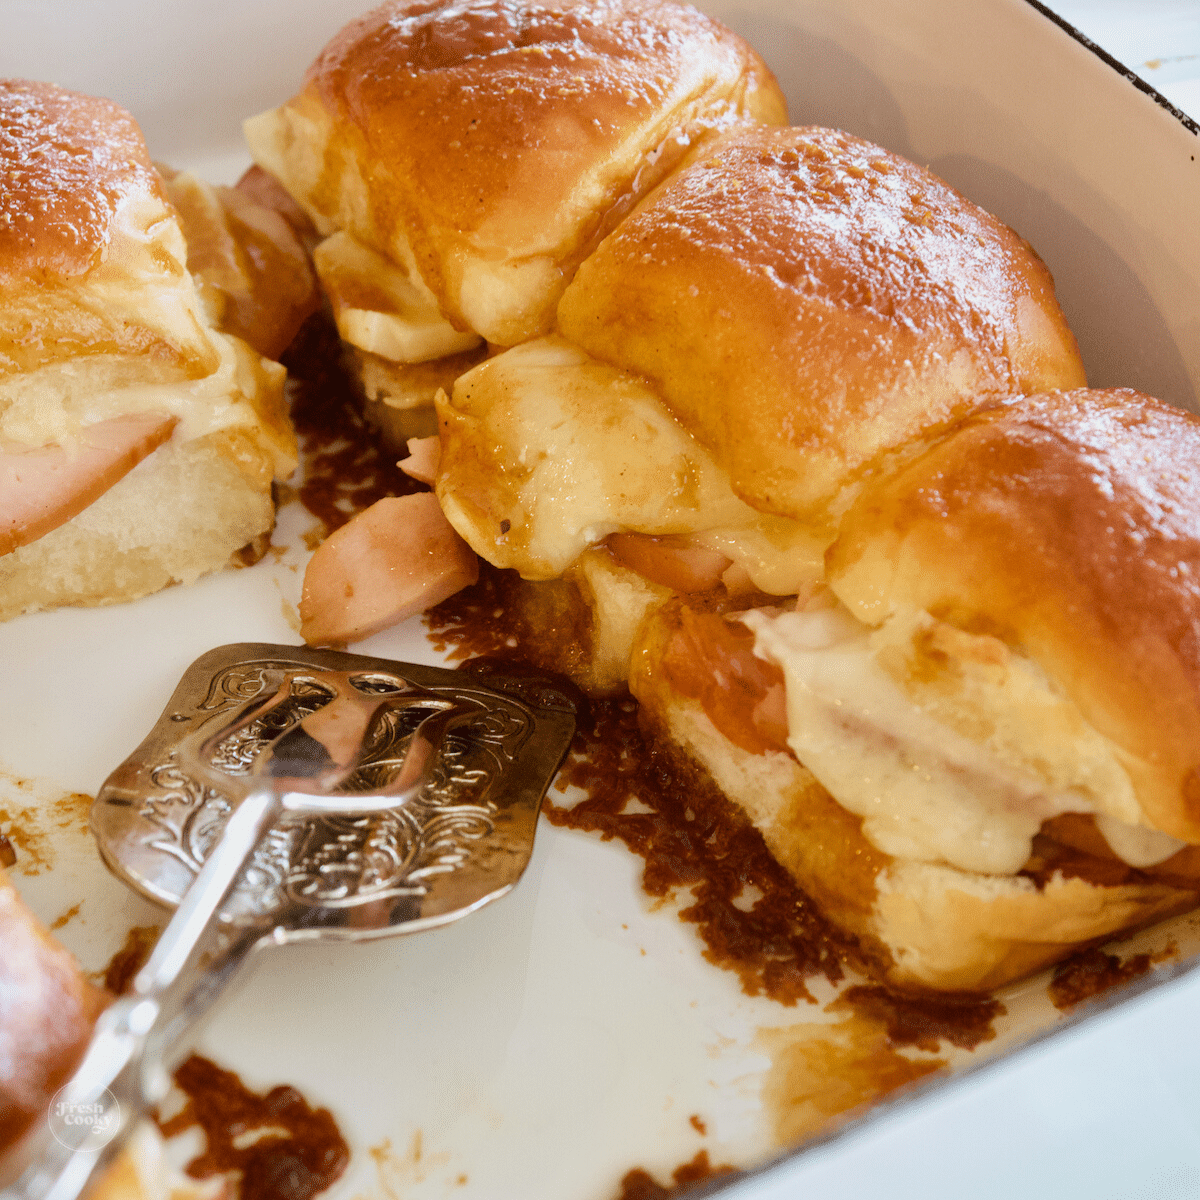 https://www.thefreshcooky.com/wp-content/uploads/2021/04/Turkey-and-cheese-sliders-square.png